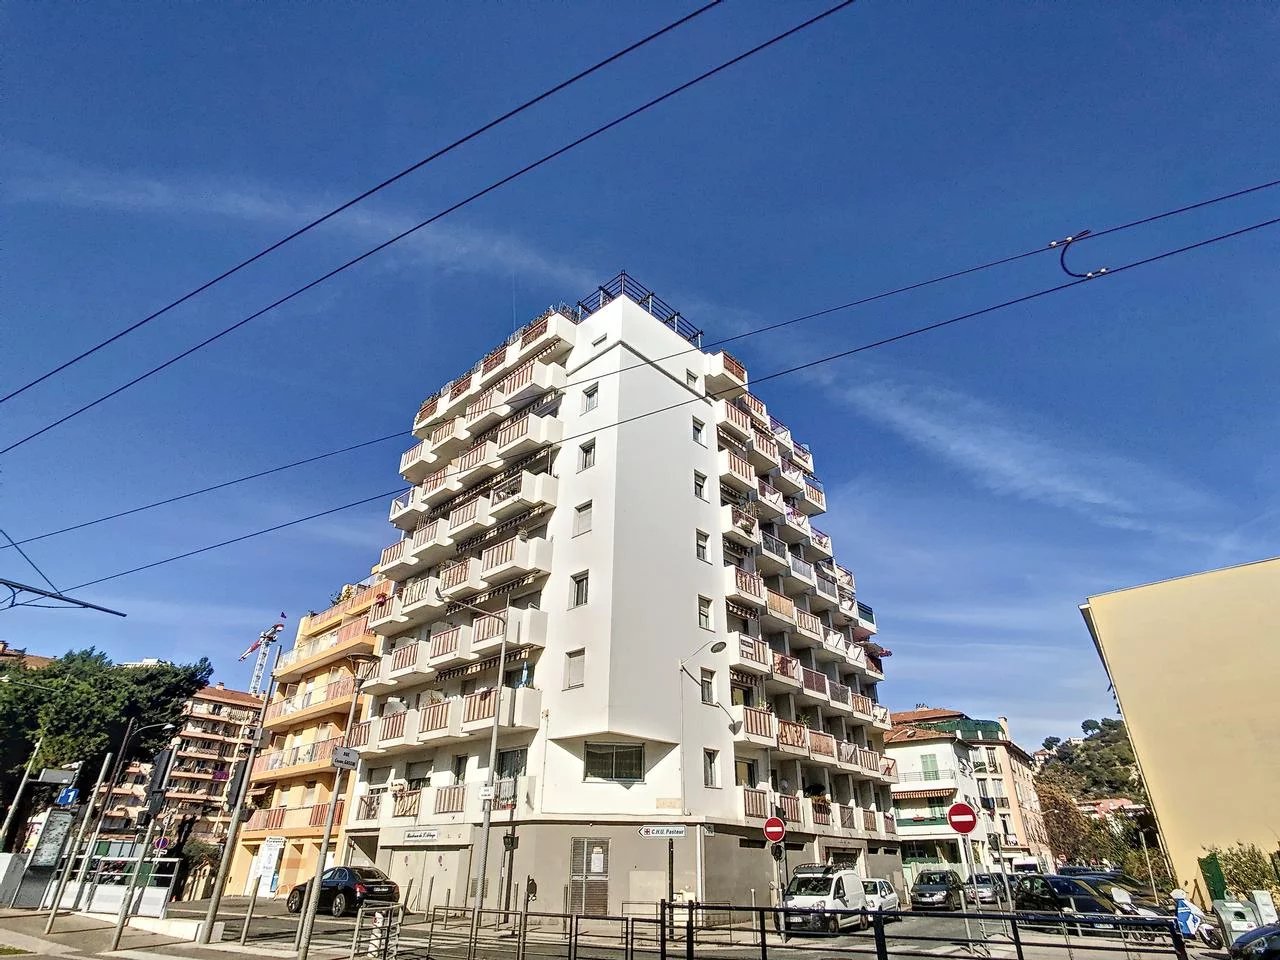 Appartement  1 Rooms 28.36m2  for sale    98 000 €